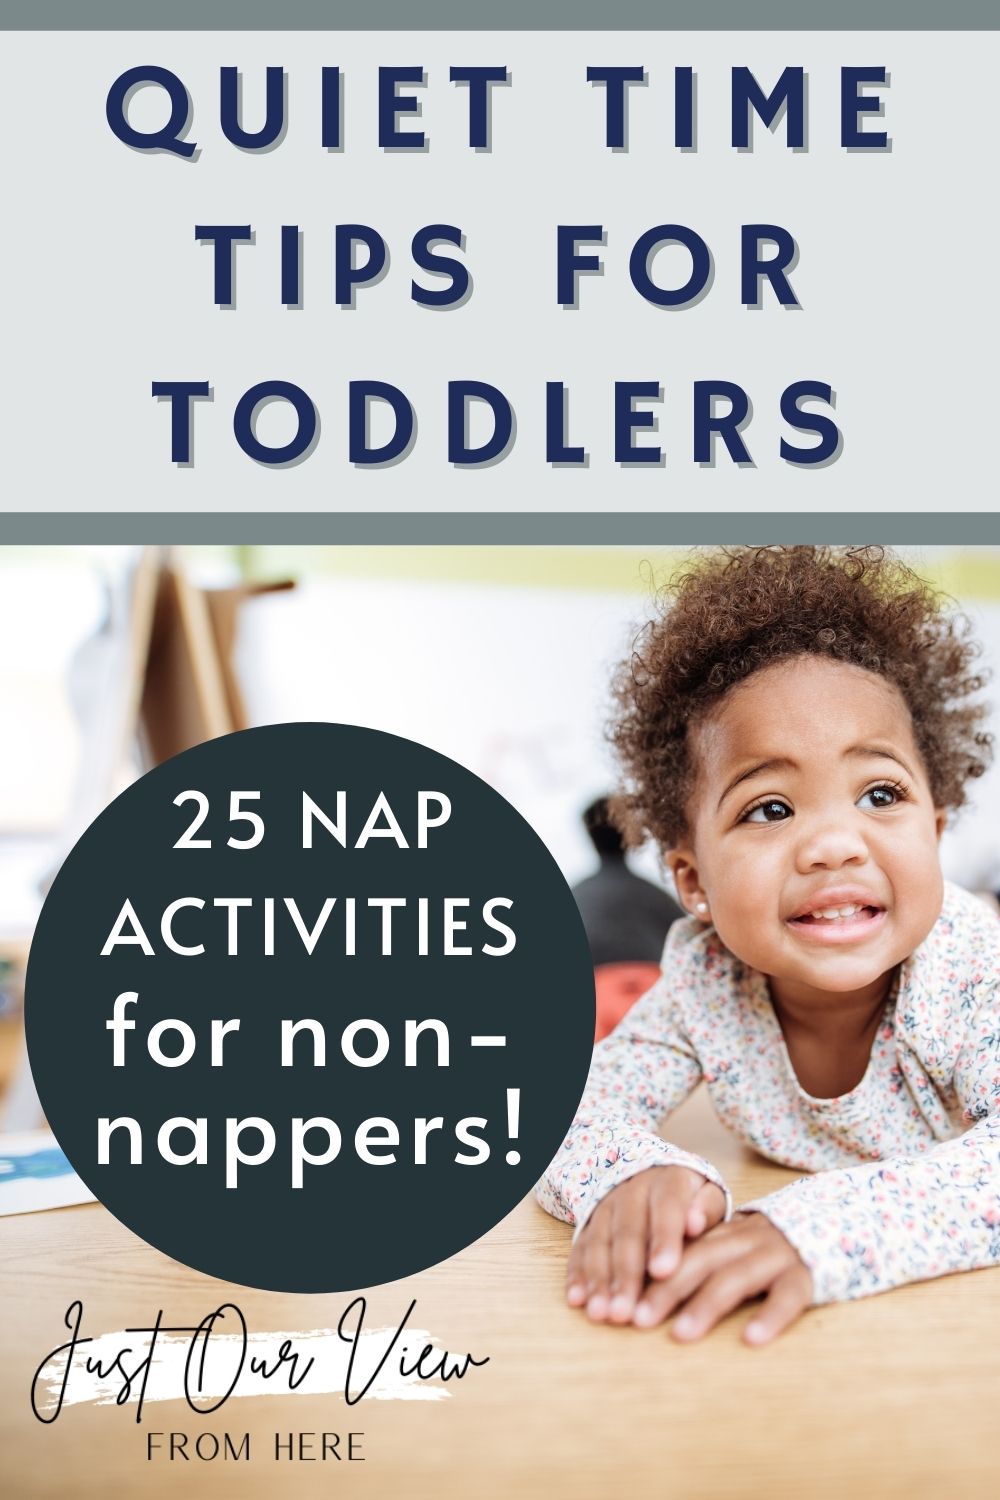 cute curly haired toddler smiling text overlay quiet time for toddlers 25 nap activities for non nappers